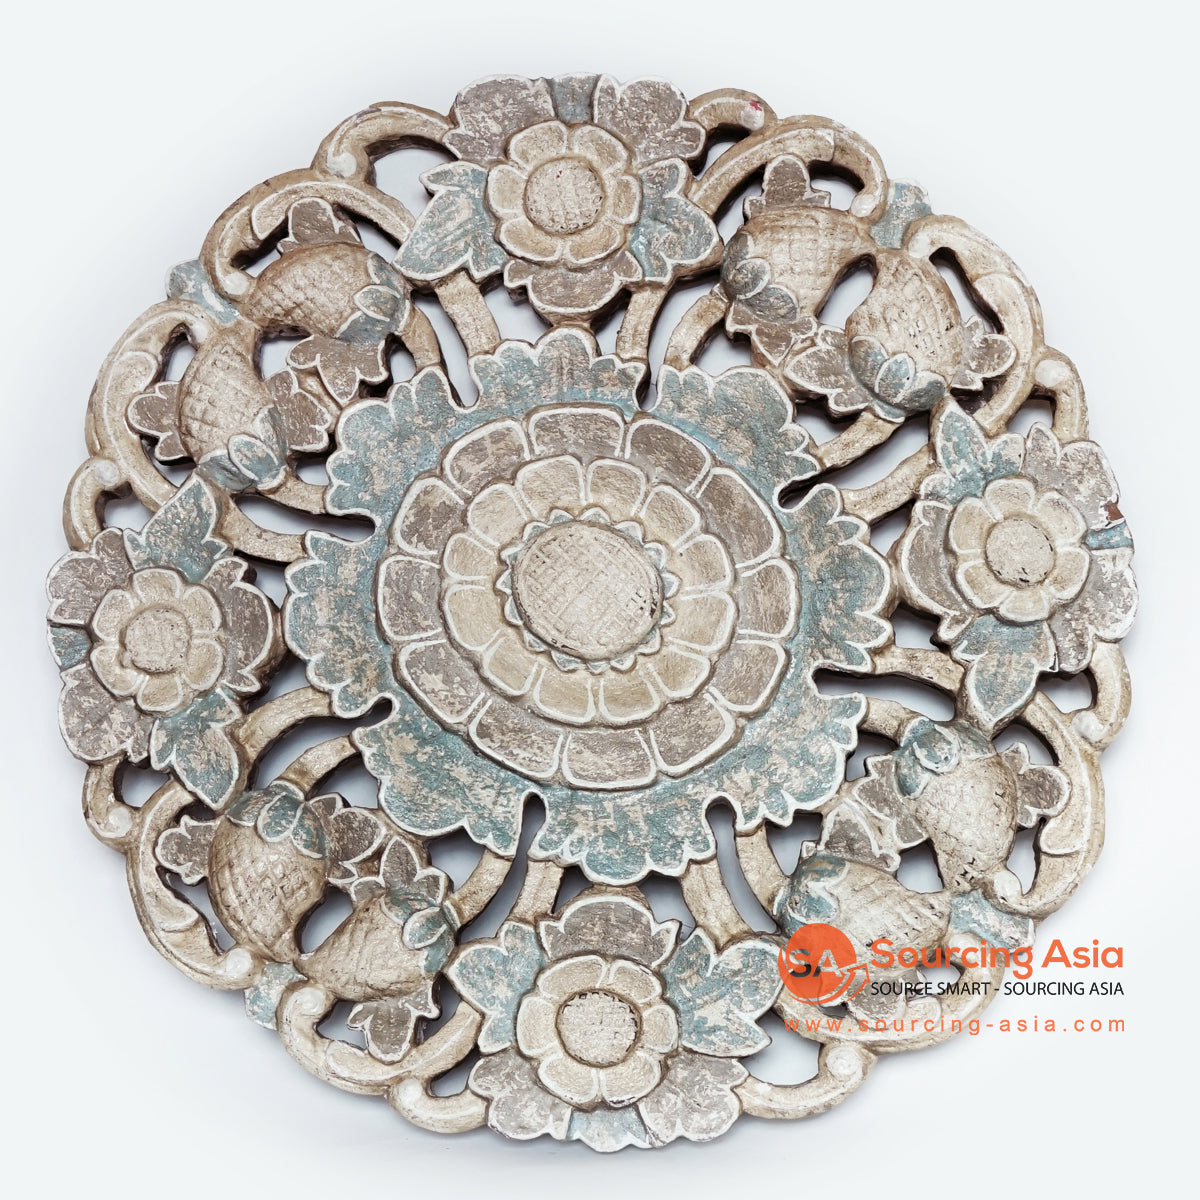 MANC010 MULTICOLOR WOODEN ROUND FLOWER CARVED PANEL